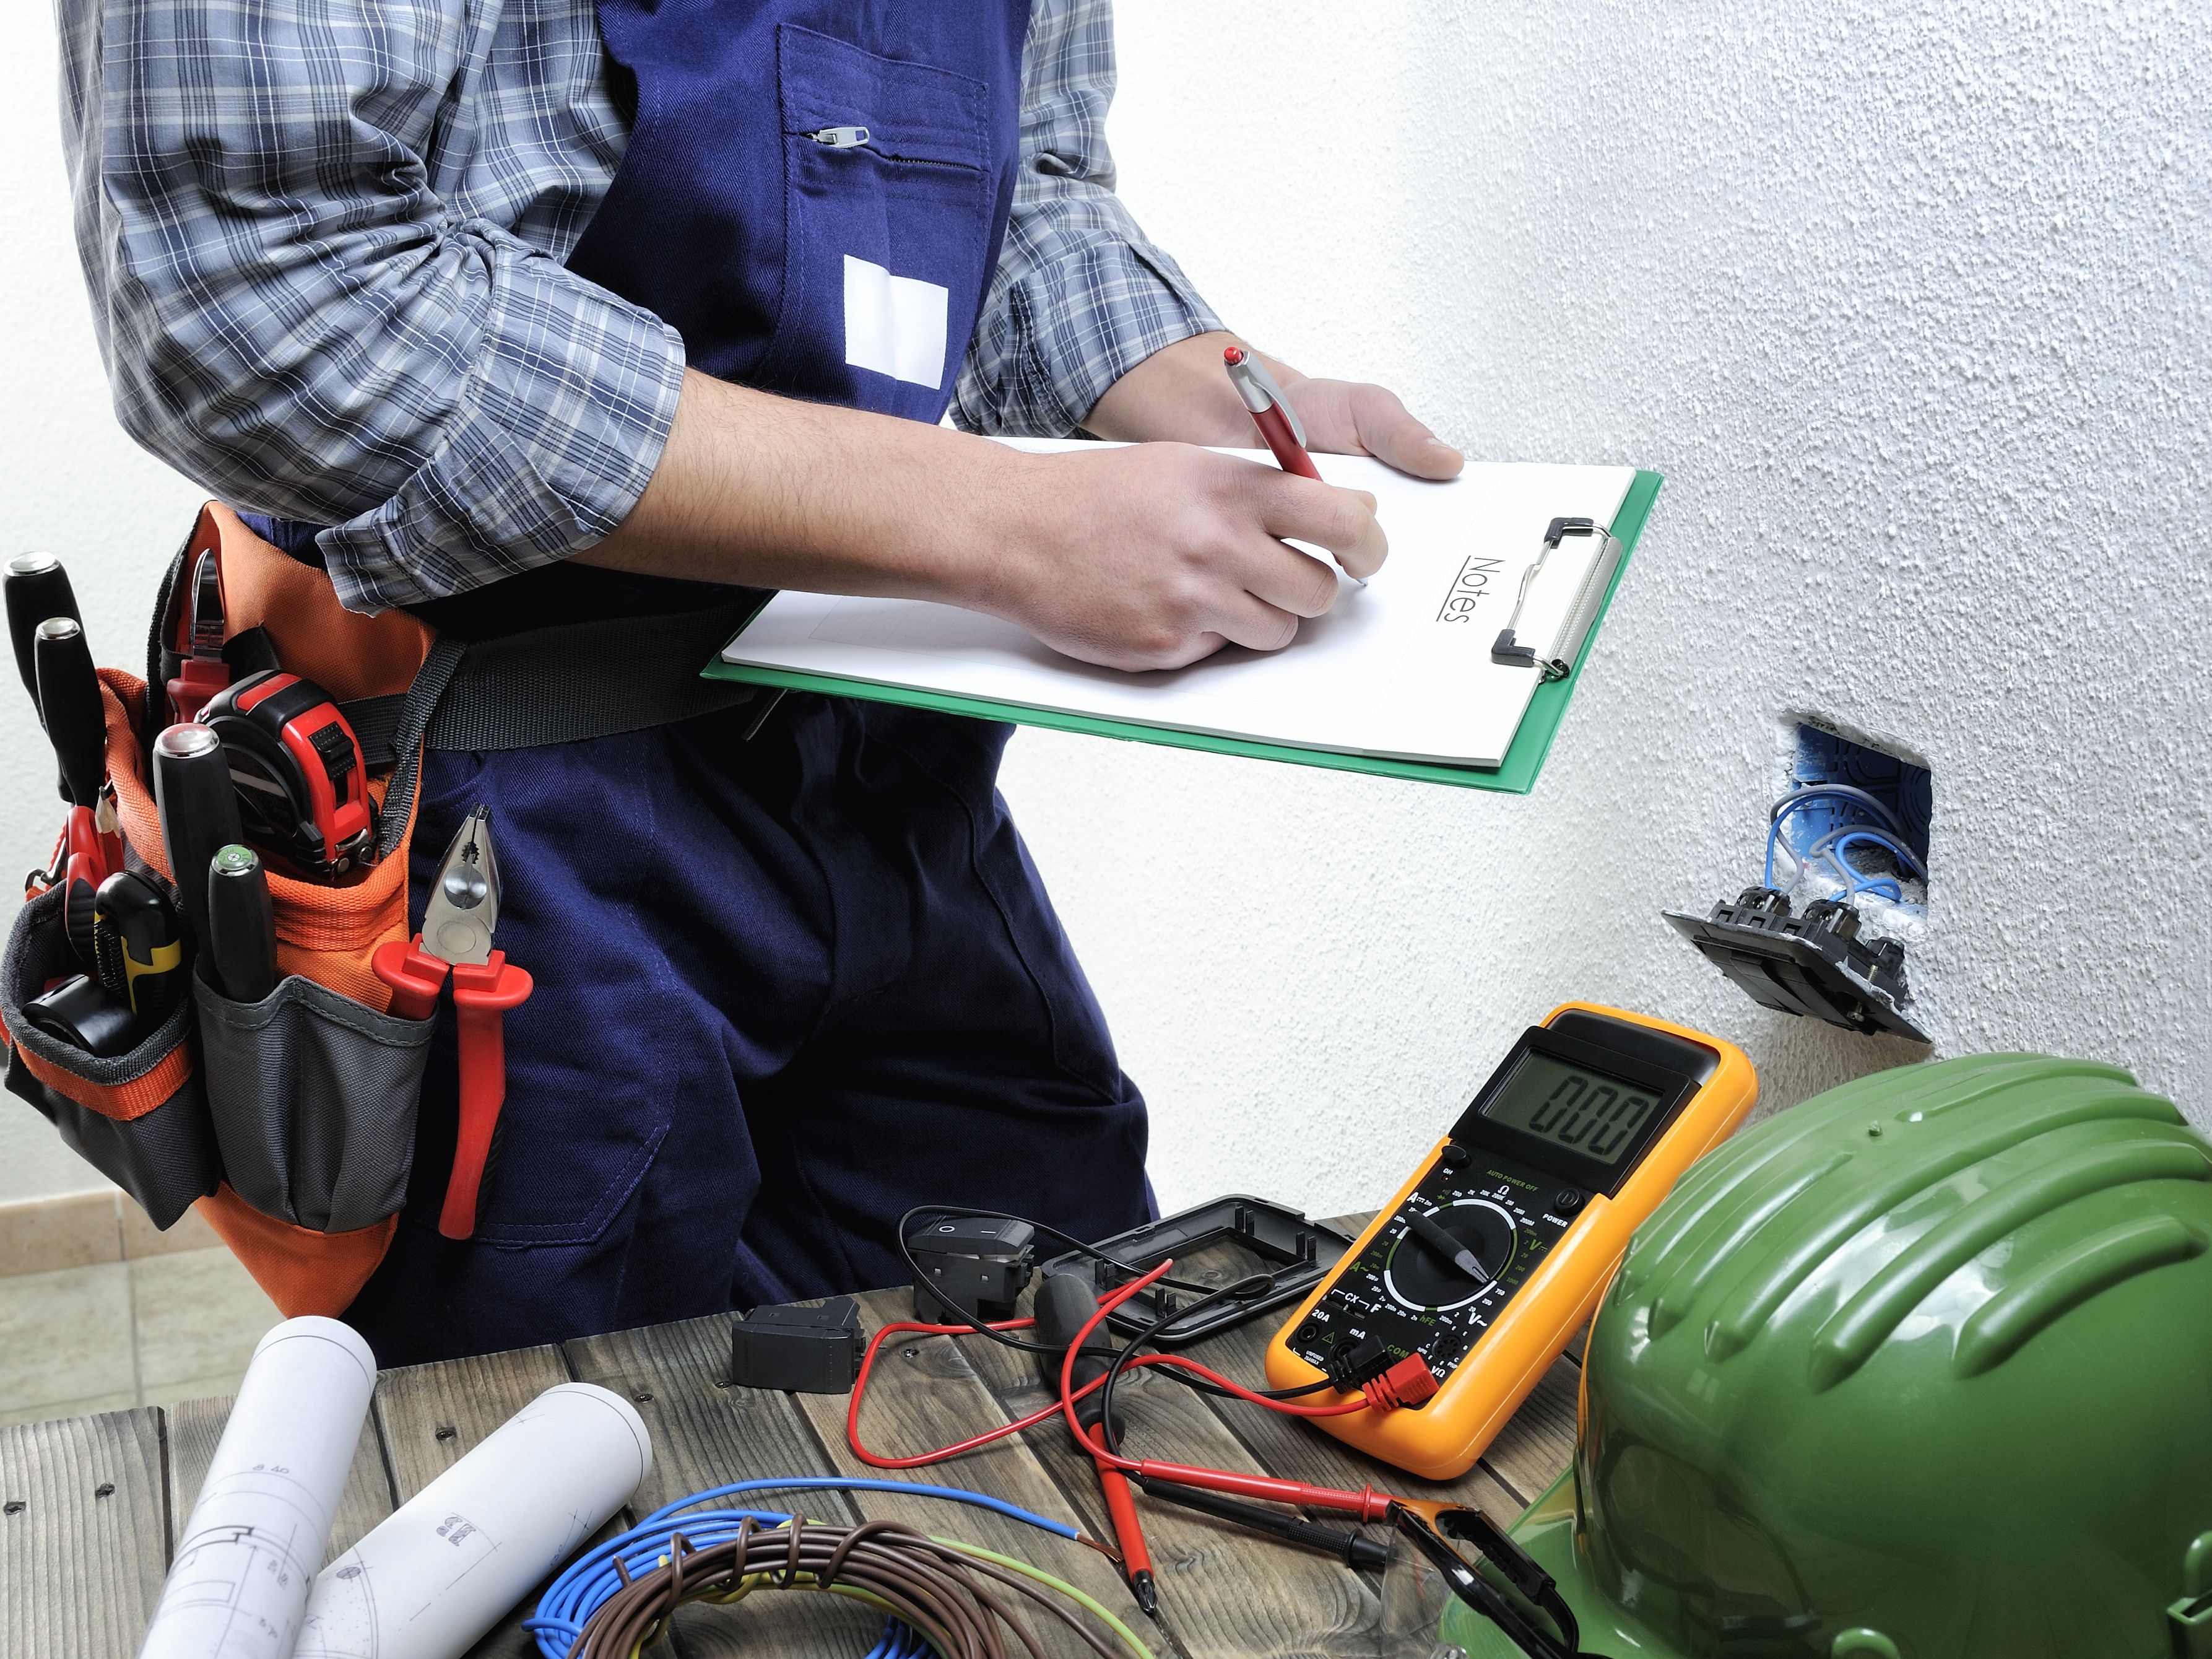 What is Megger and How to Check Electrical Cable by using Megger